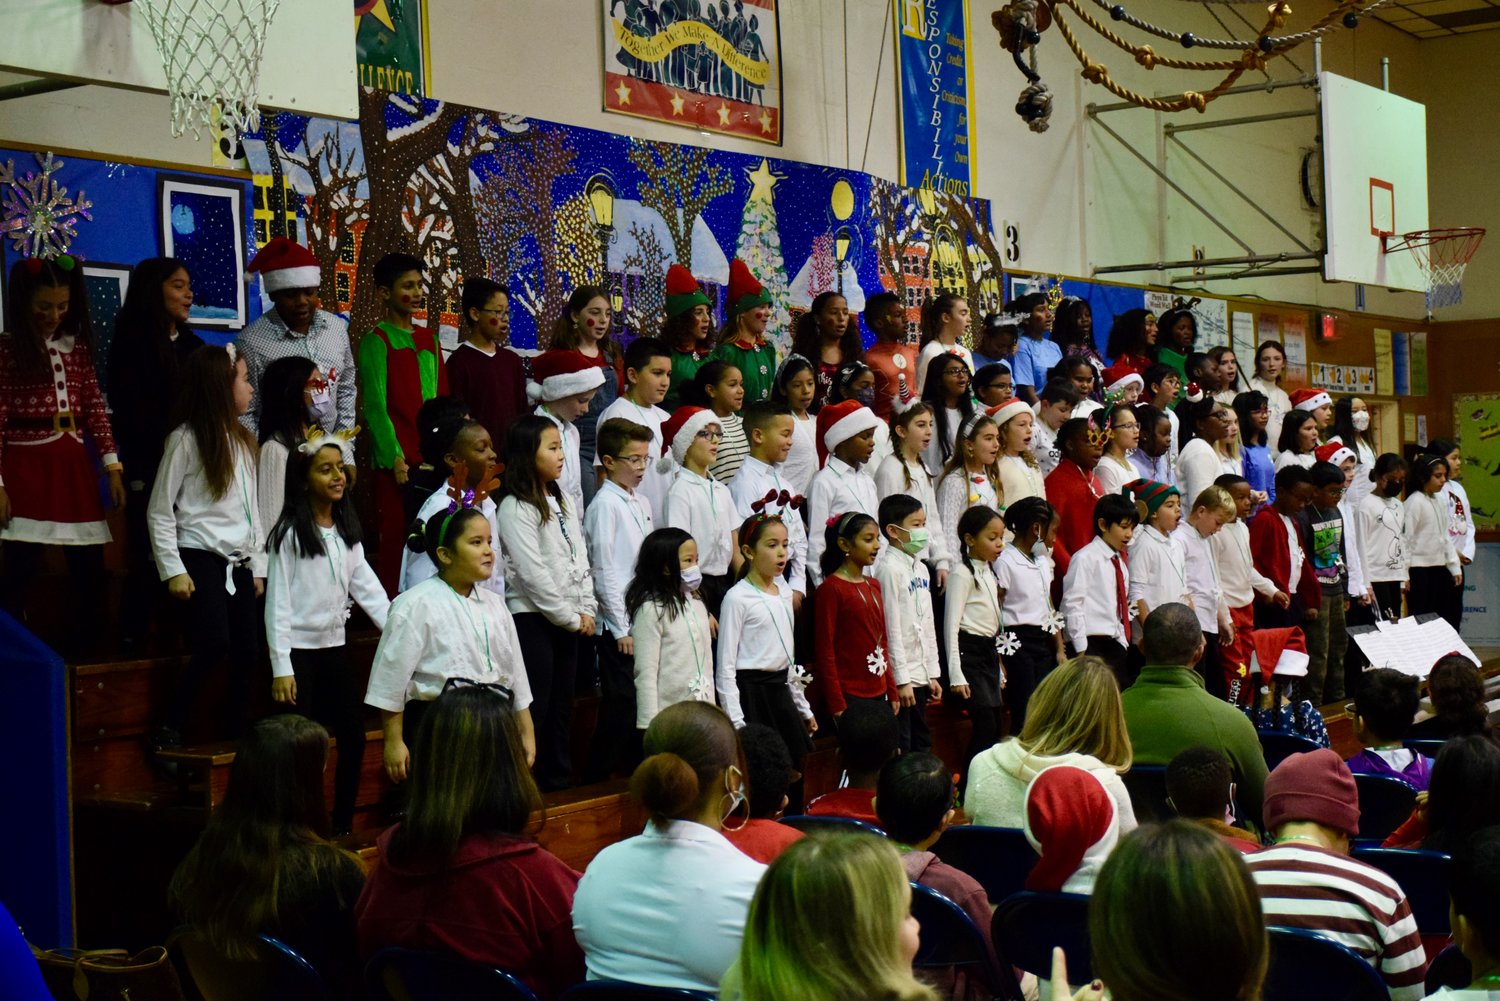 Stewart Manor School’s combined chorus performed during the morning show on Dec. 15.